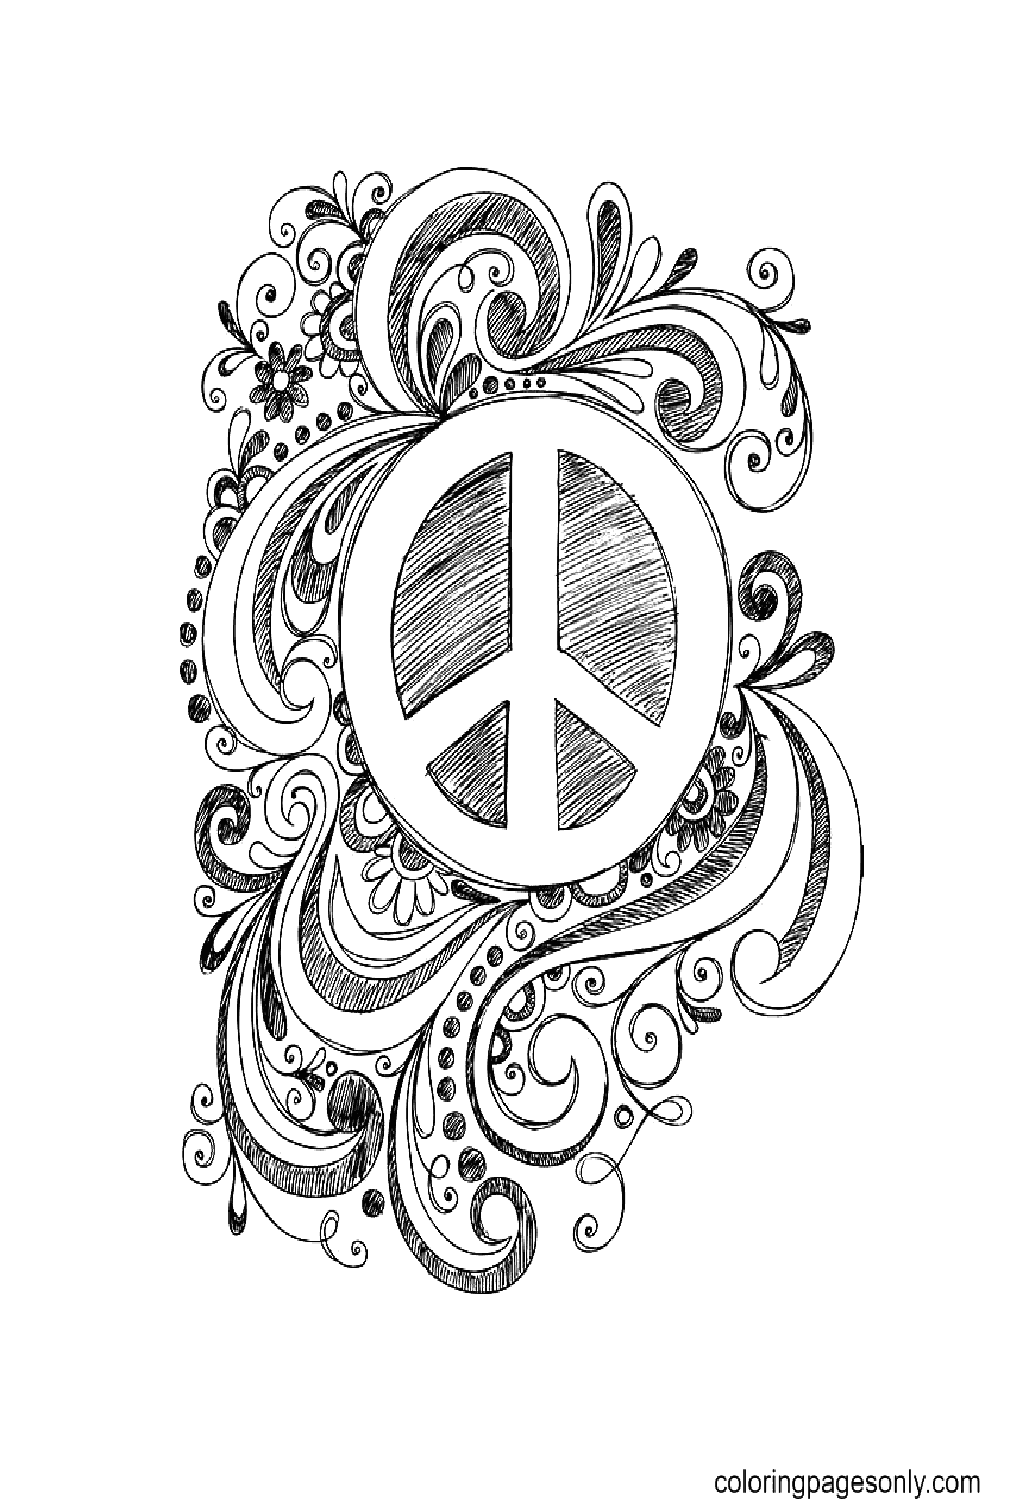 Free Printable Peace Sign from International Day of Peace